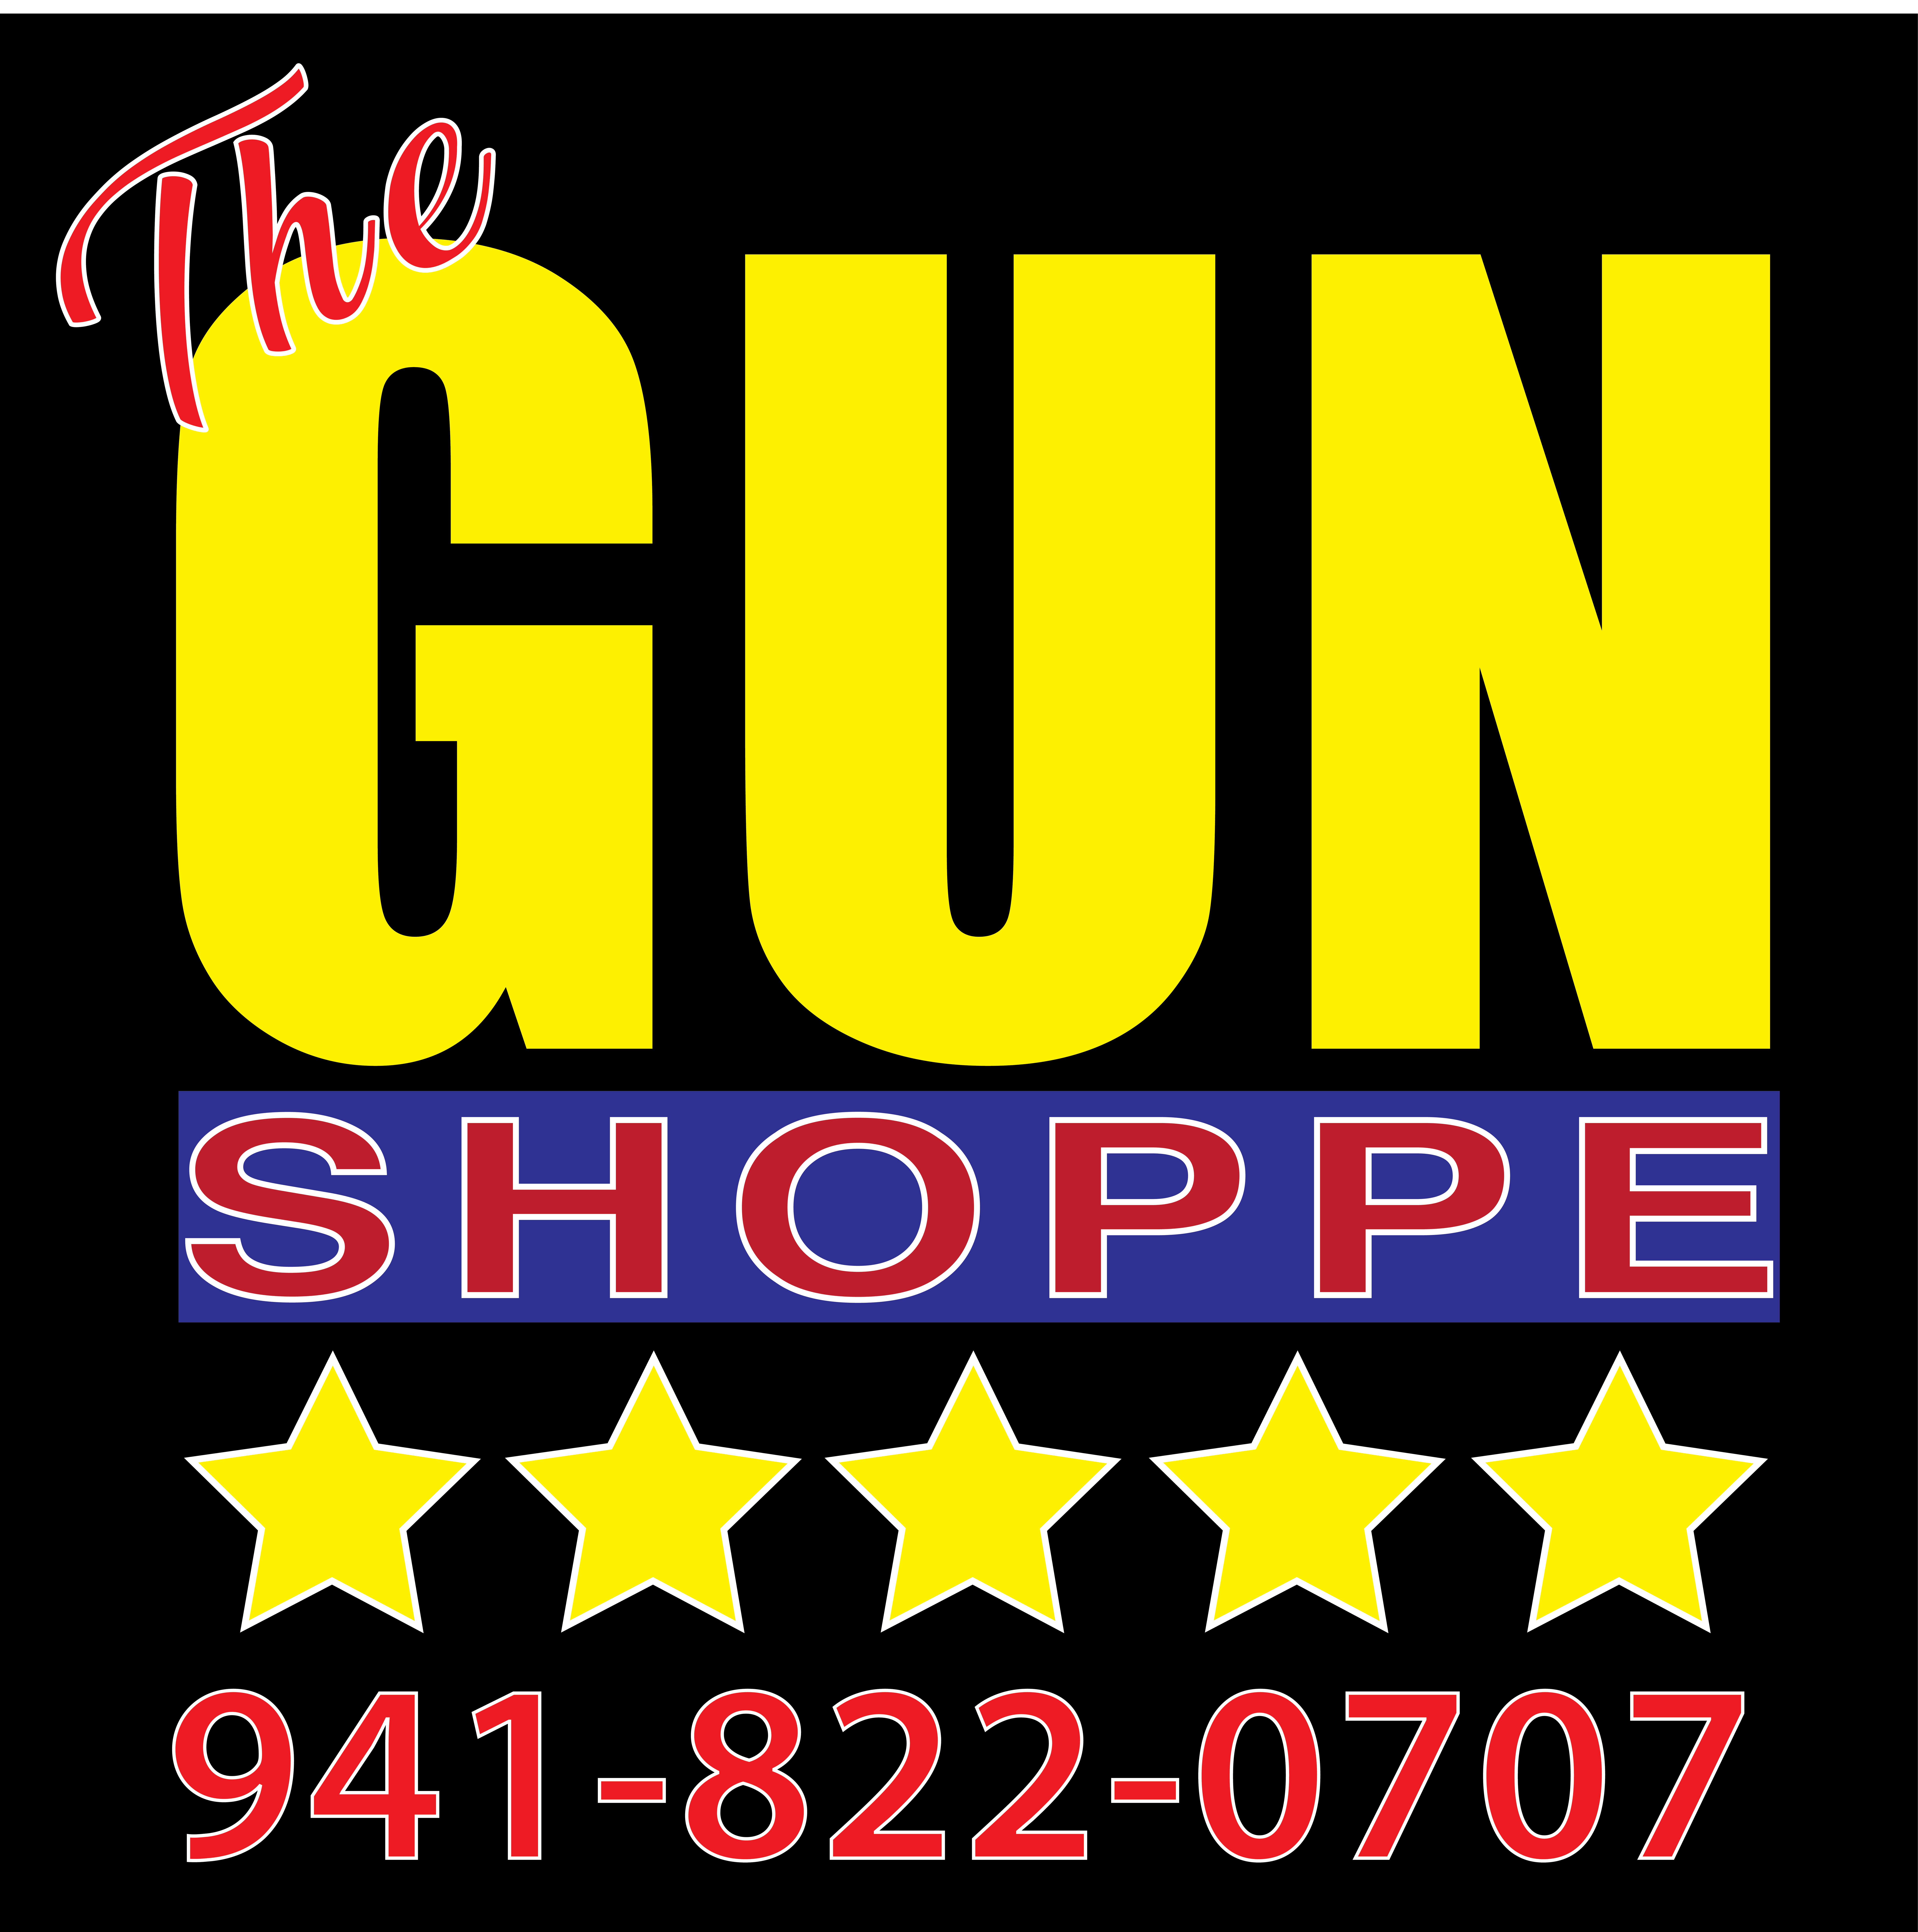 Have you ever wondered why gun shops are on edge lately?